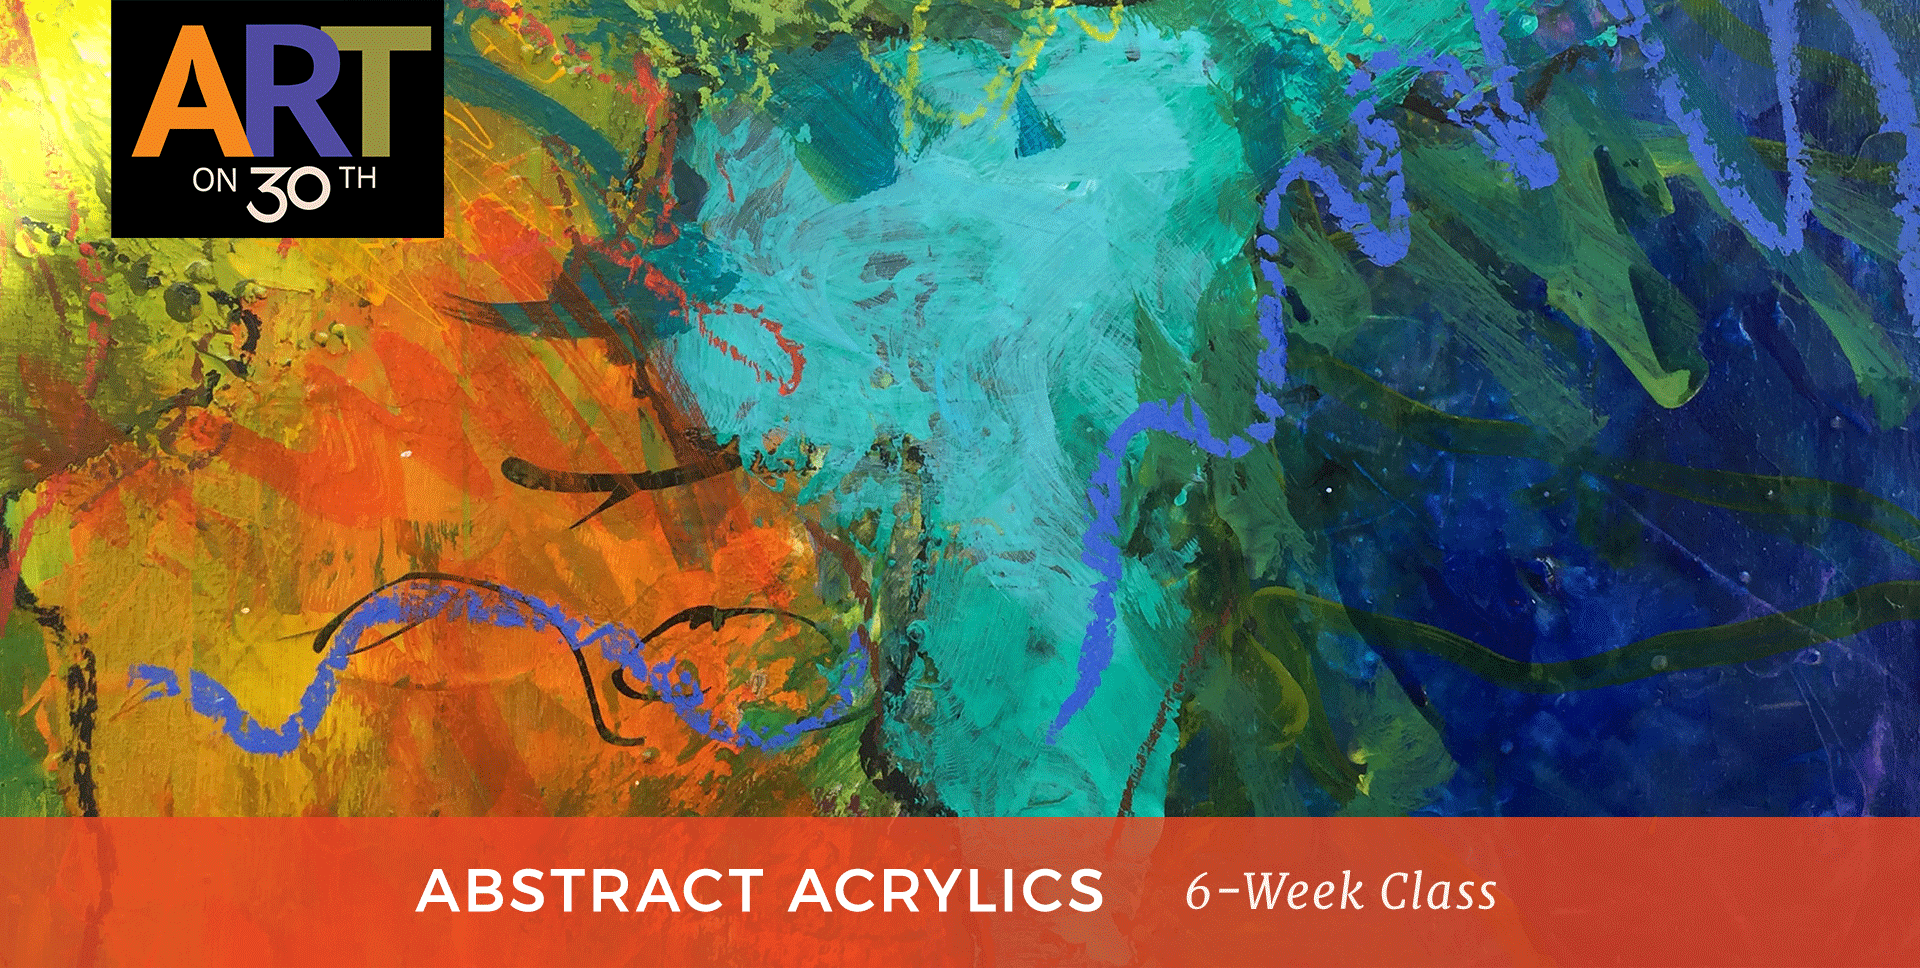 TUE - Abstract Acrylic Painting with Kate Ashton & Kristen Ide